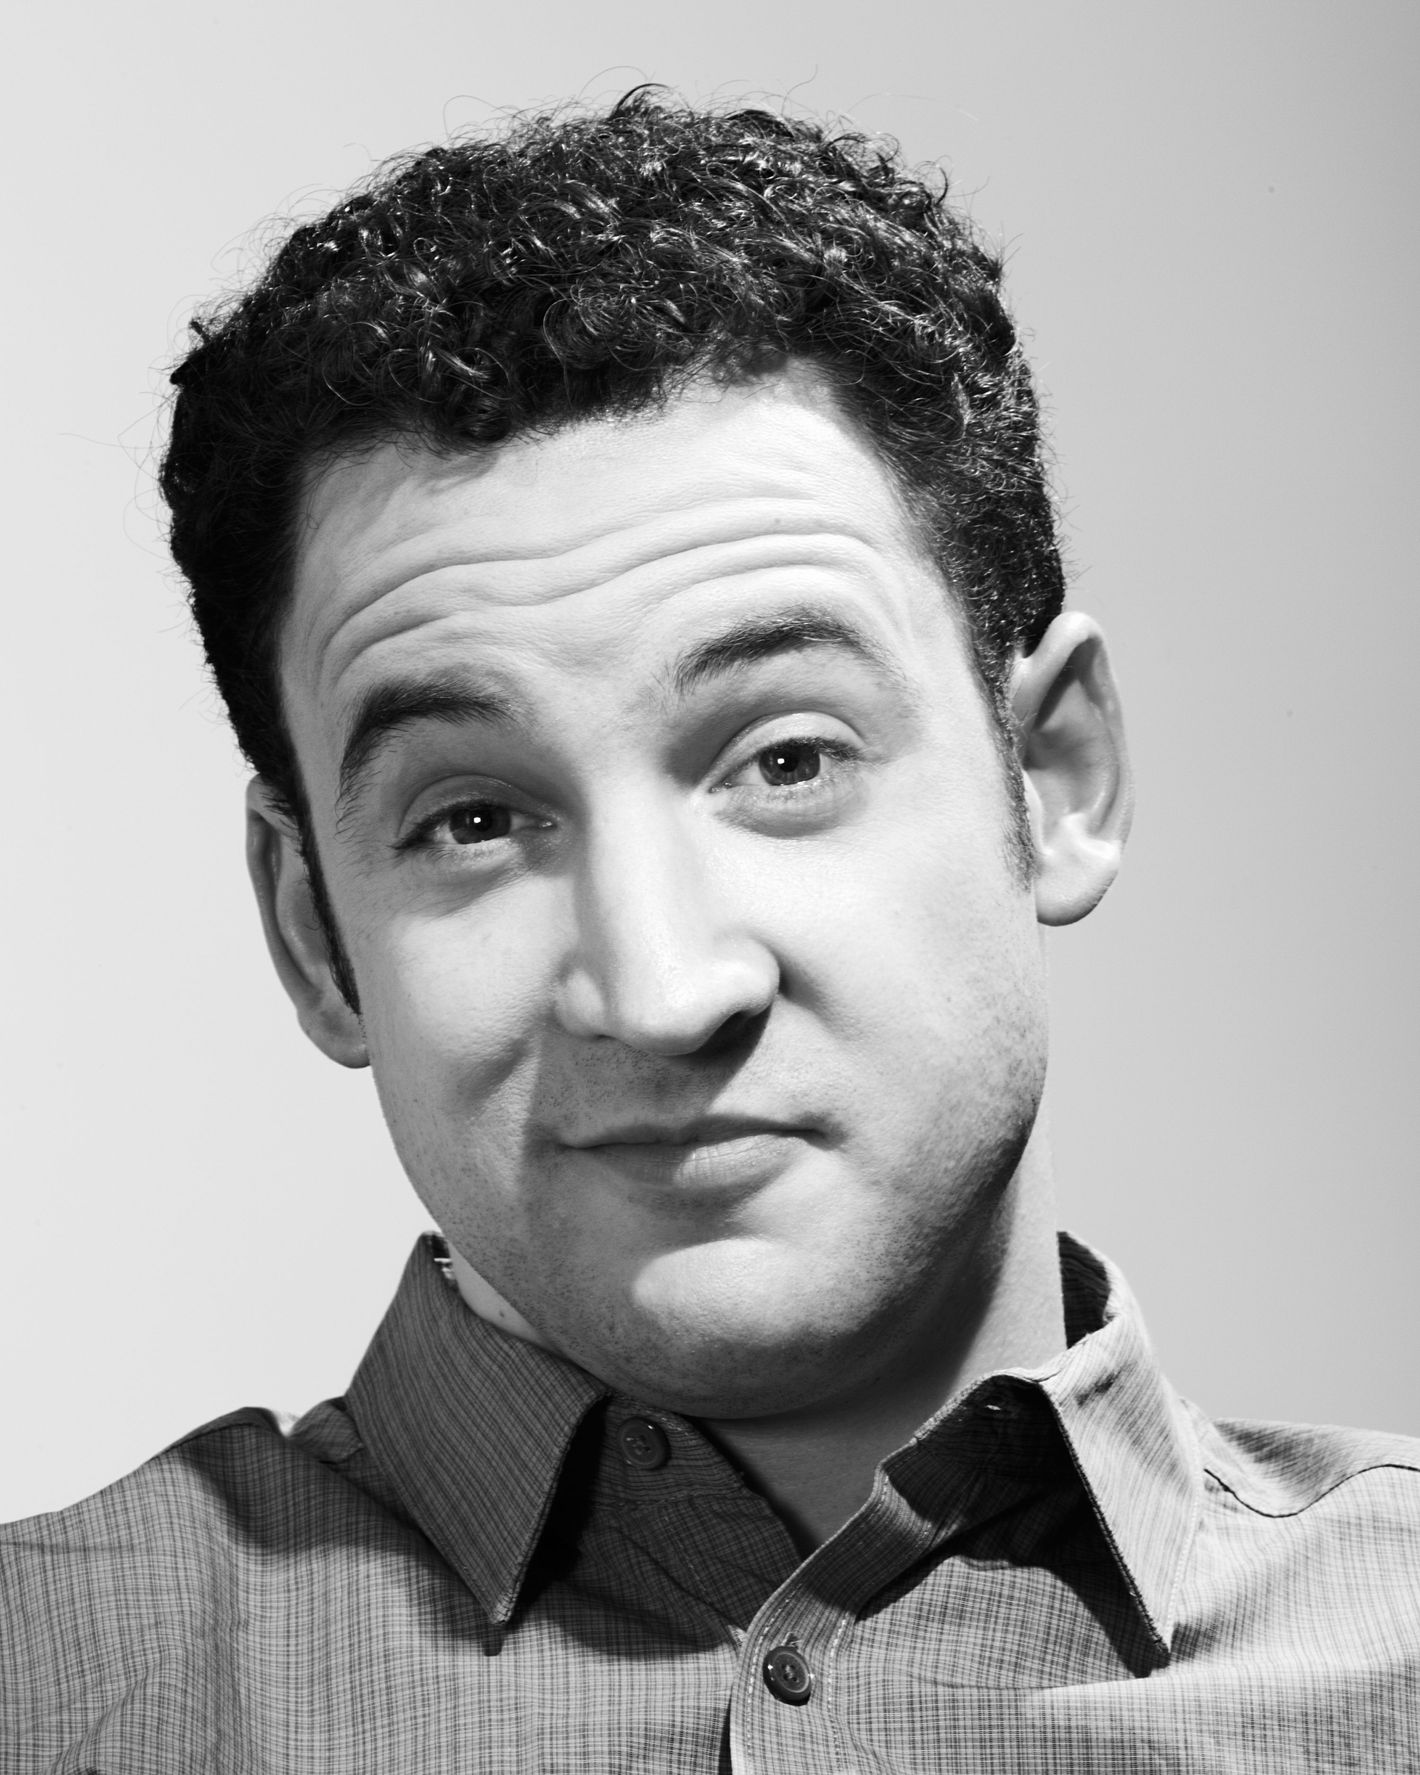 Ben Savage on Boy Meets World, Girl Meets World, and the Meaning of Life